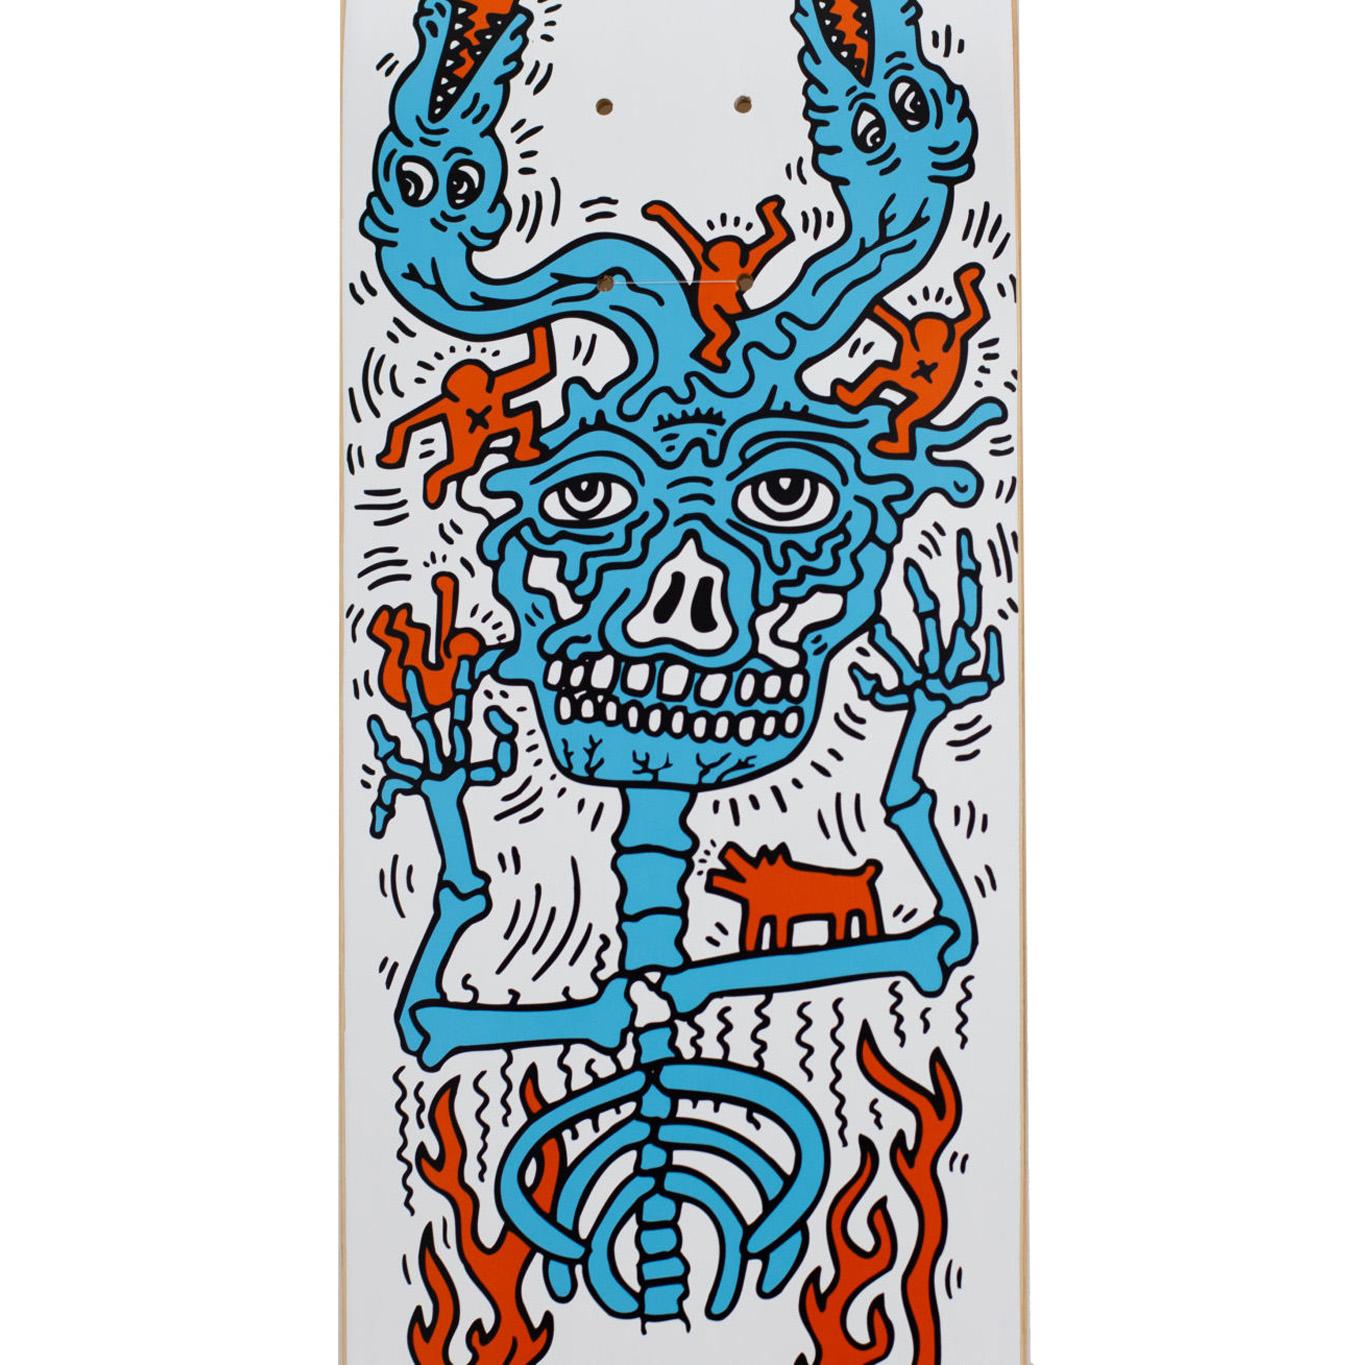 The Skateroom w/ ©Keith Haring Foundation
Set of 3 skateboard decks
7-Ply Canadian Maplewood with screen-print
Measures: 31 H x 8 inches, each
Mounting hardware included
Open edition (screen-printed signature)
Licensed by Artestar, New